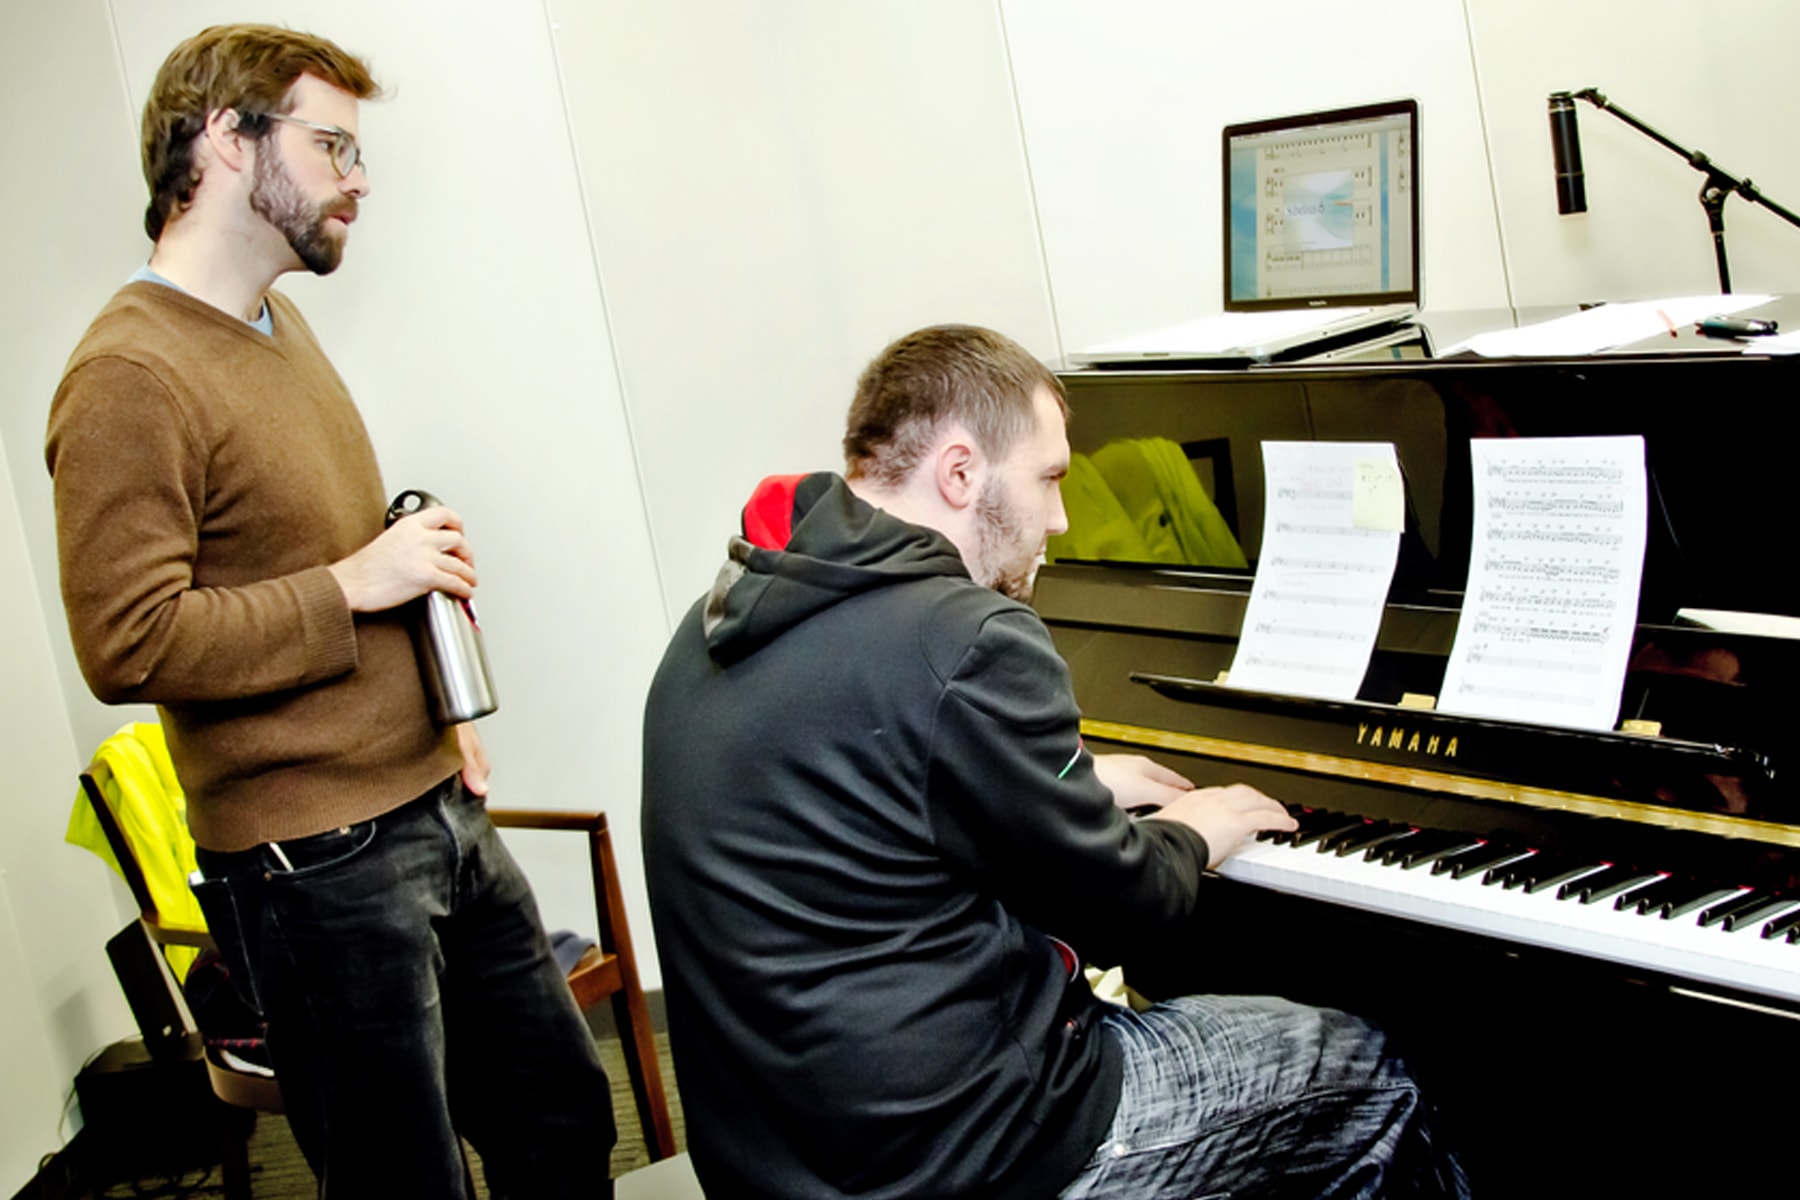 DigiPen students playing the piano in the new sound lab recording studio